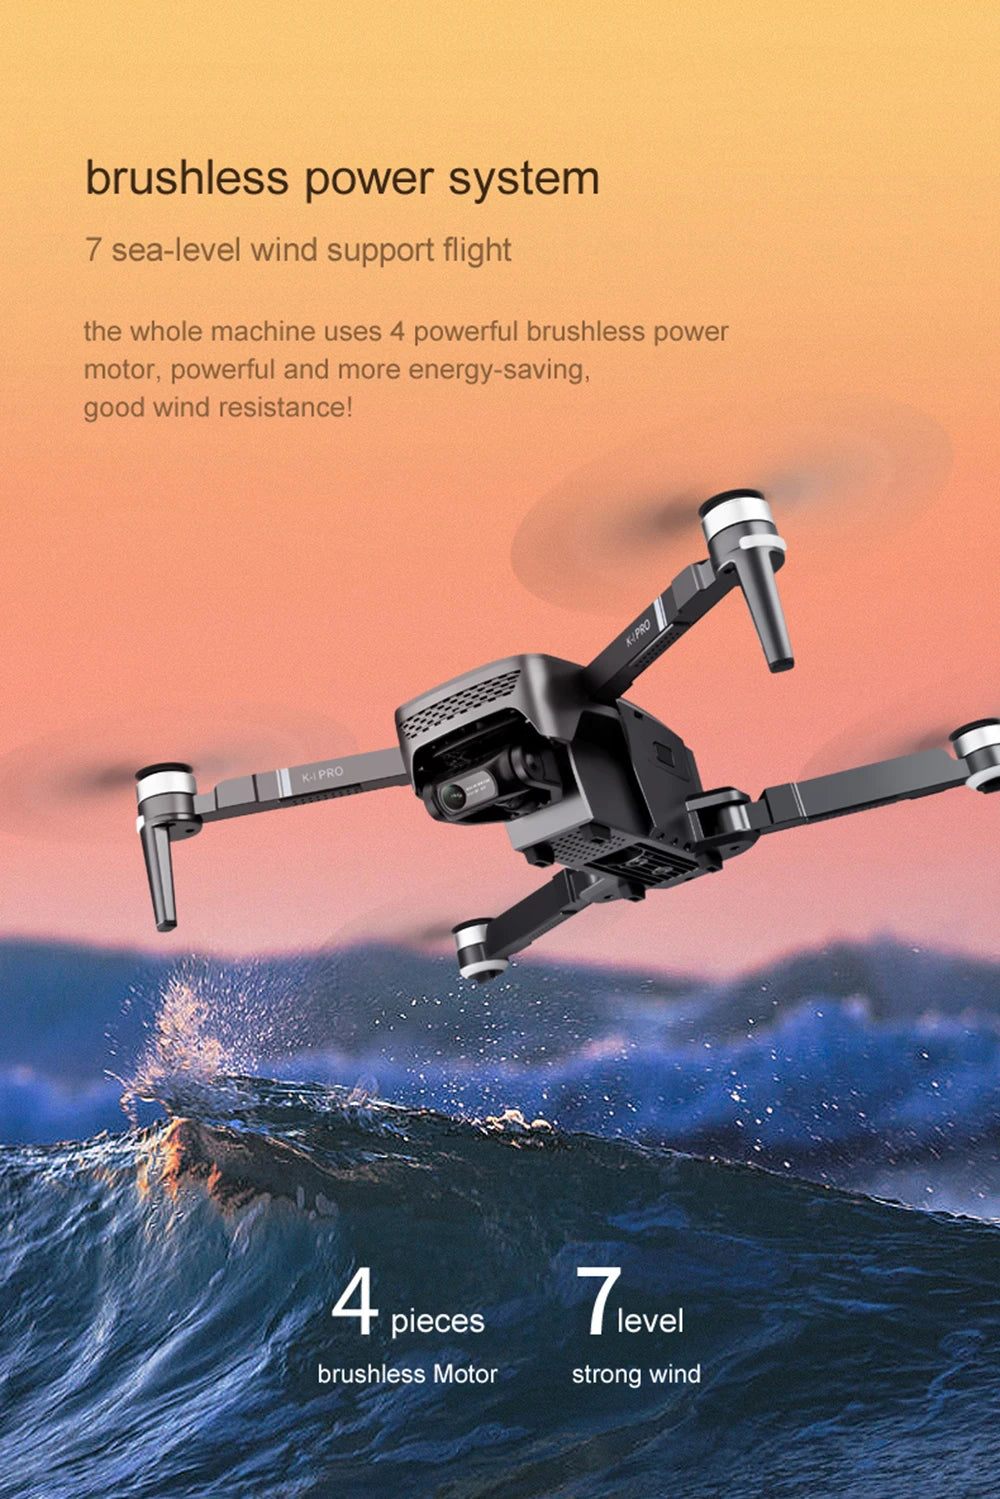 VISUO ZEN K1 PRO Drone, brushless power system 7 sea-level wind support flight the whole machine uses powerful and more energy